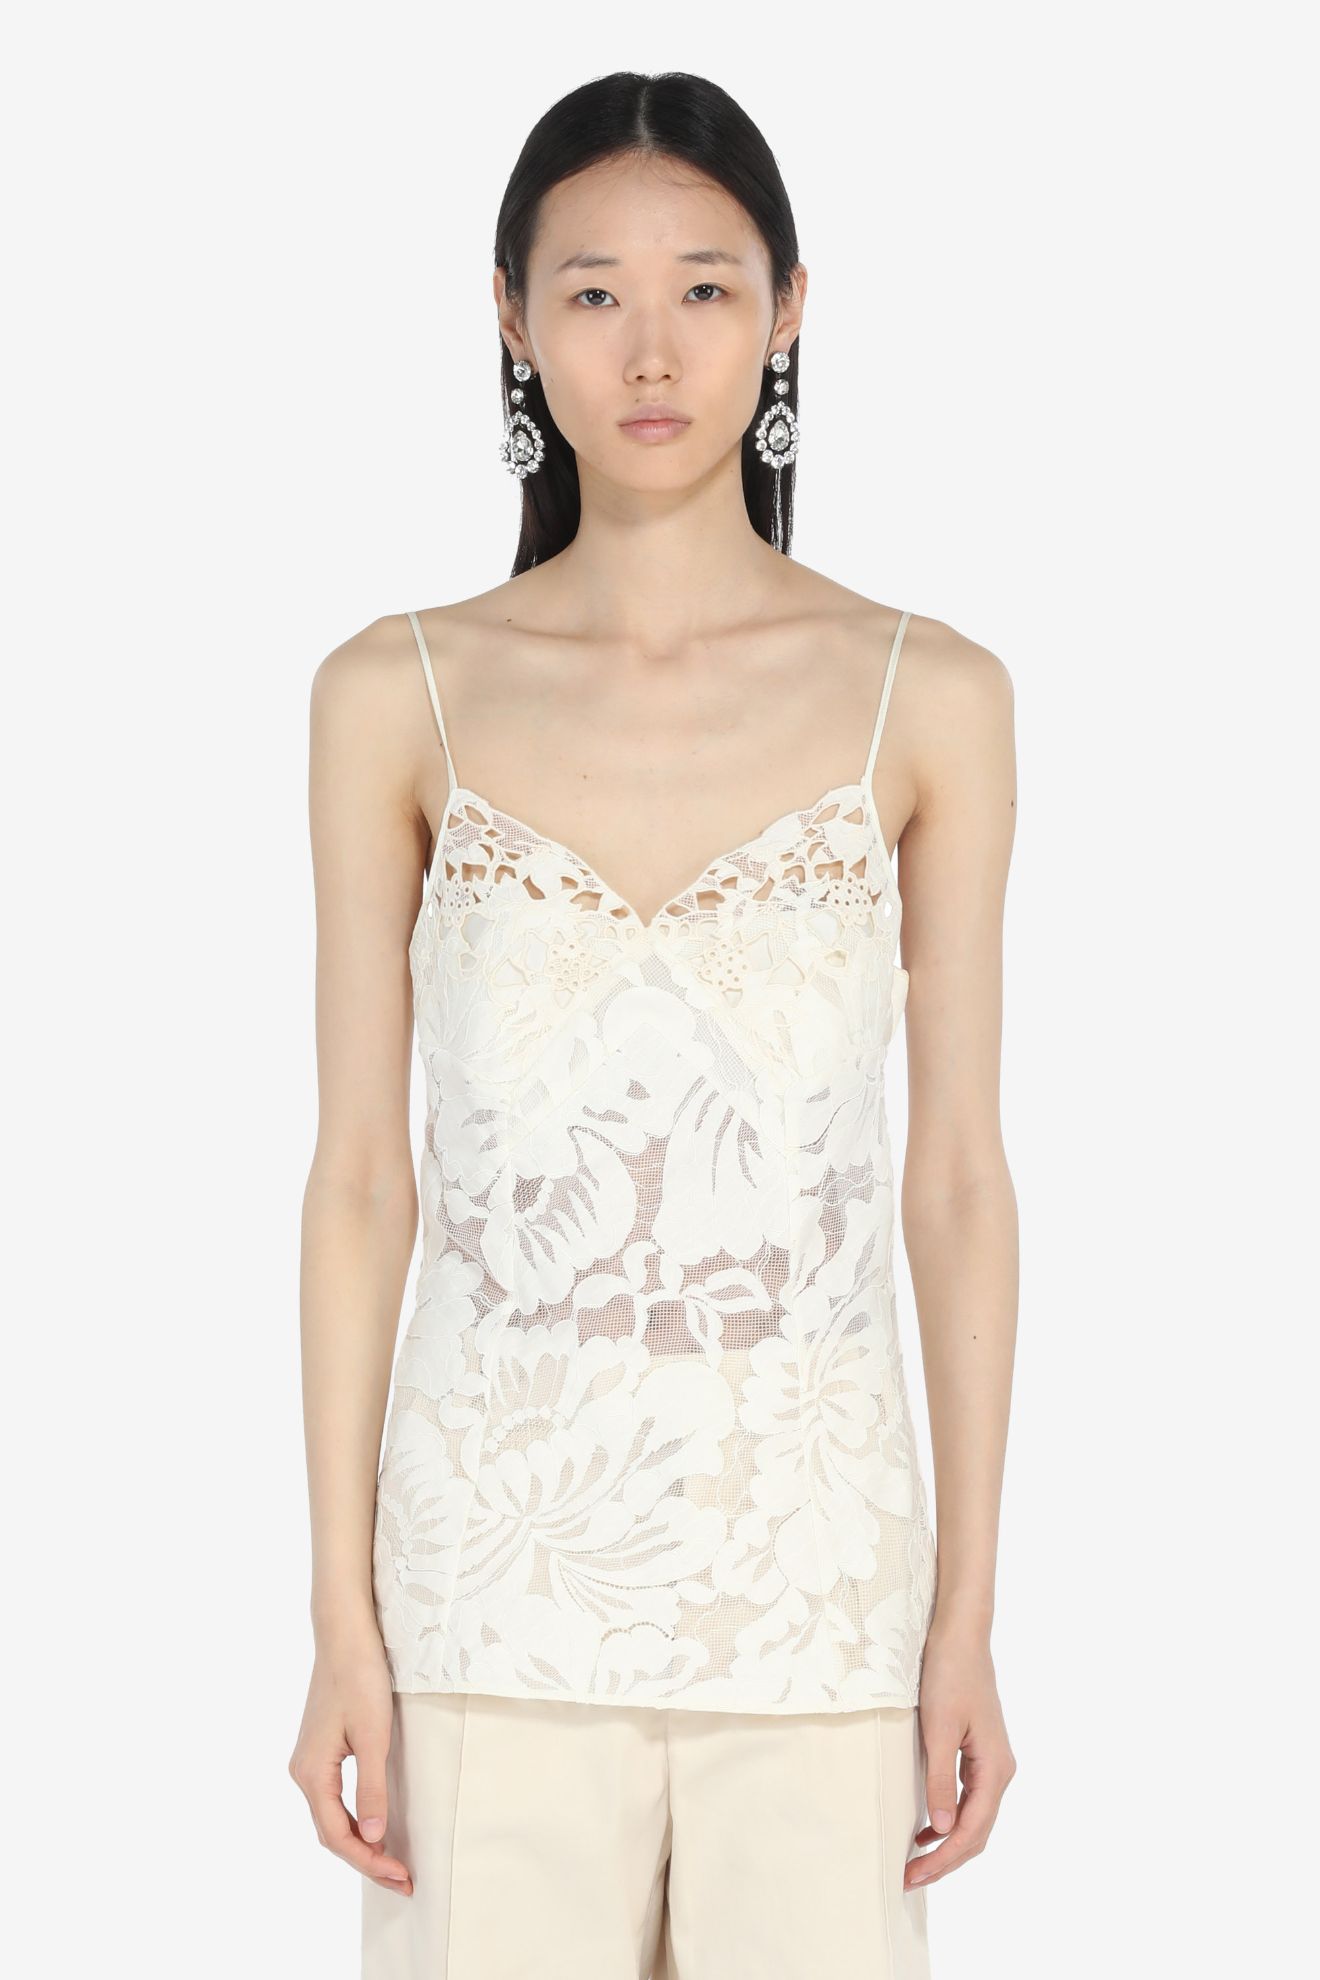 Lace Camisole Top in white, N°21